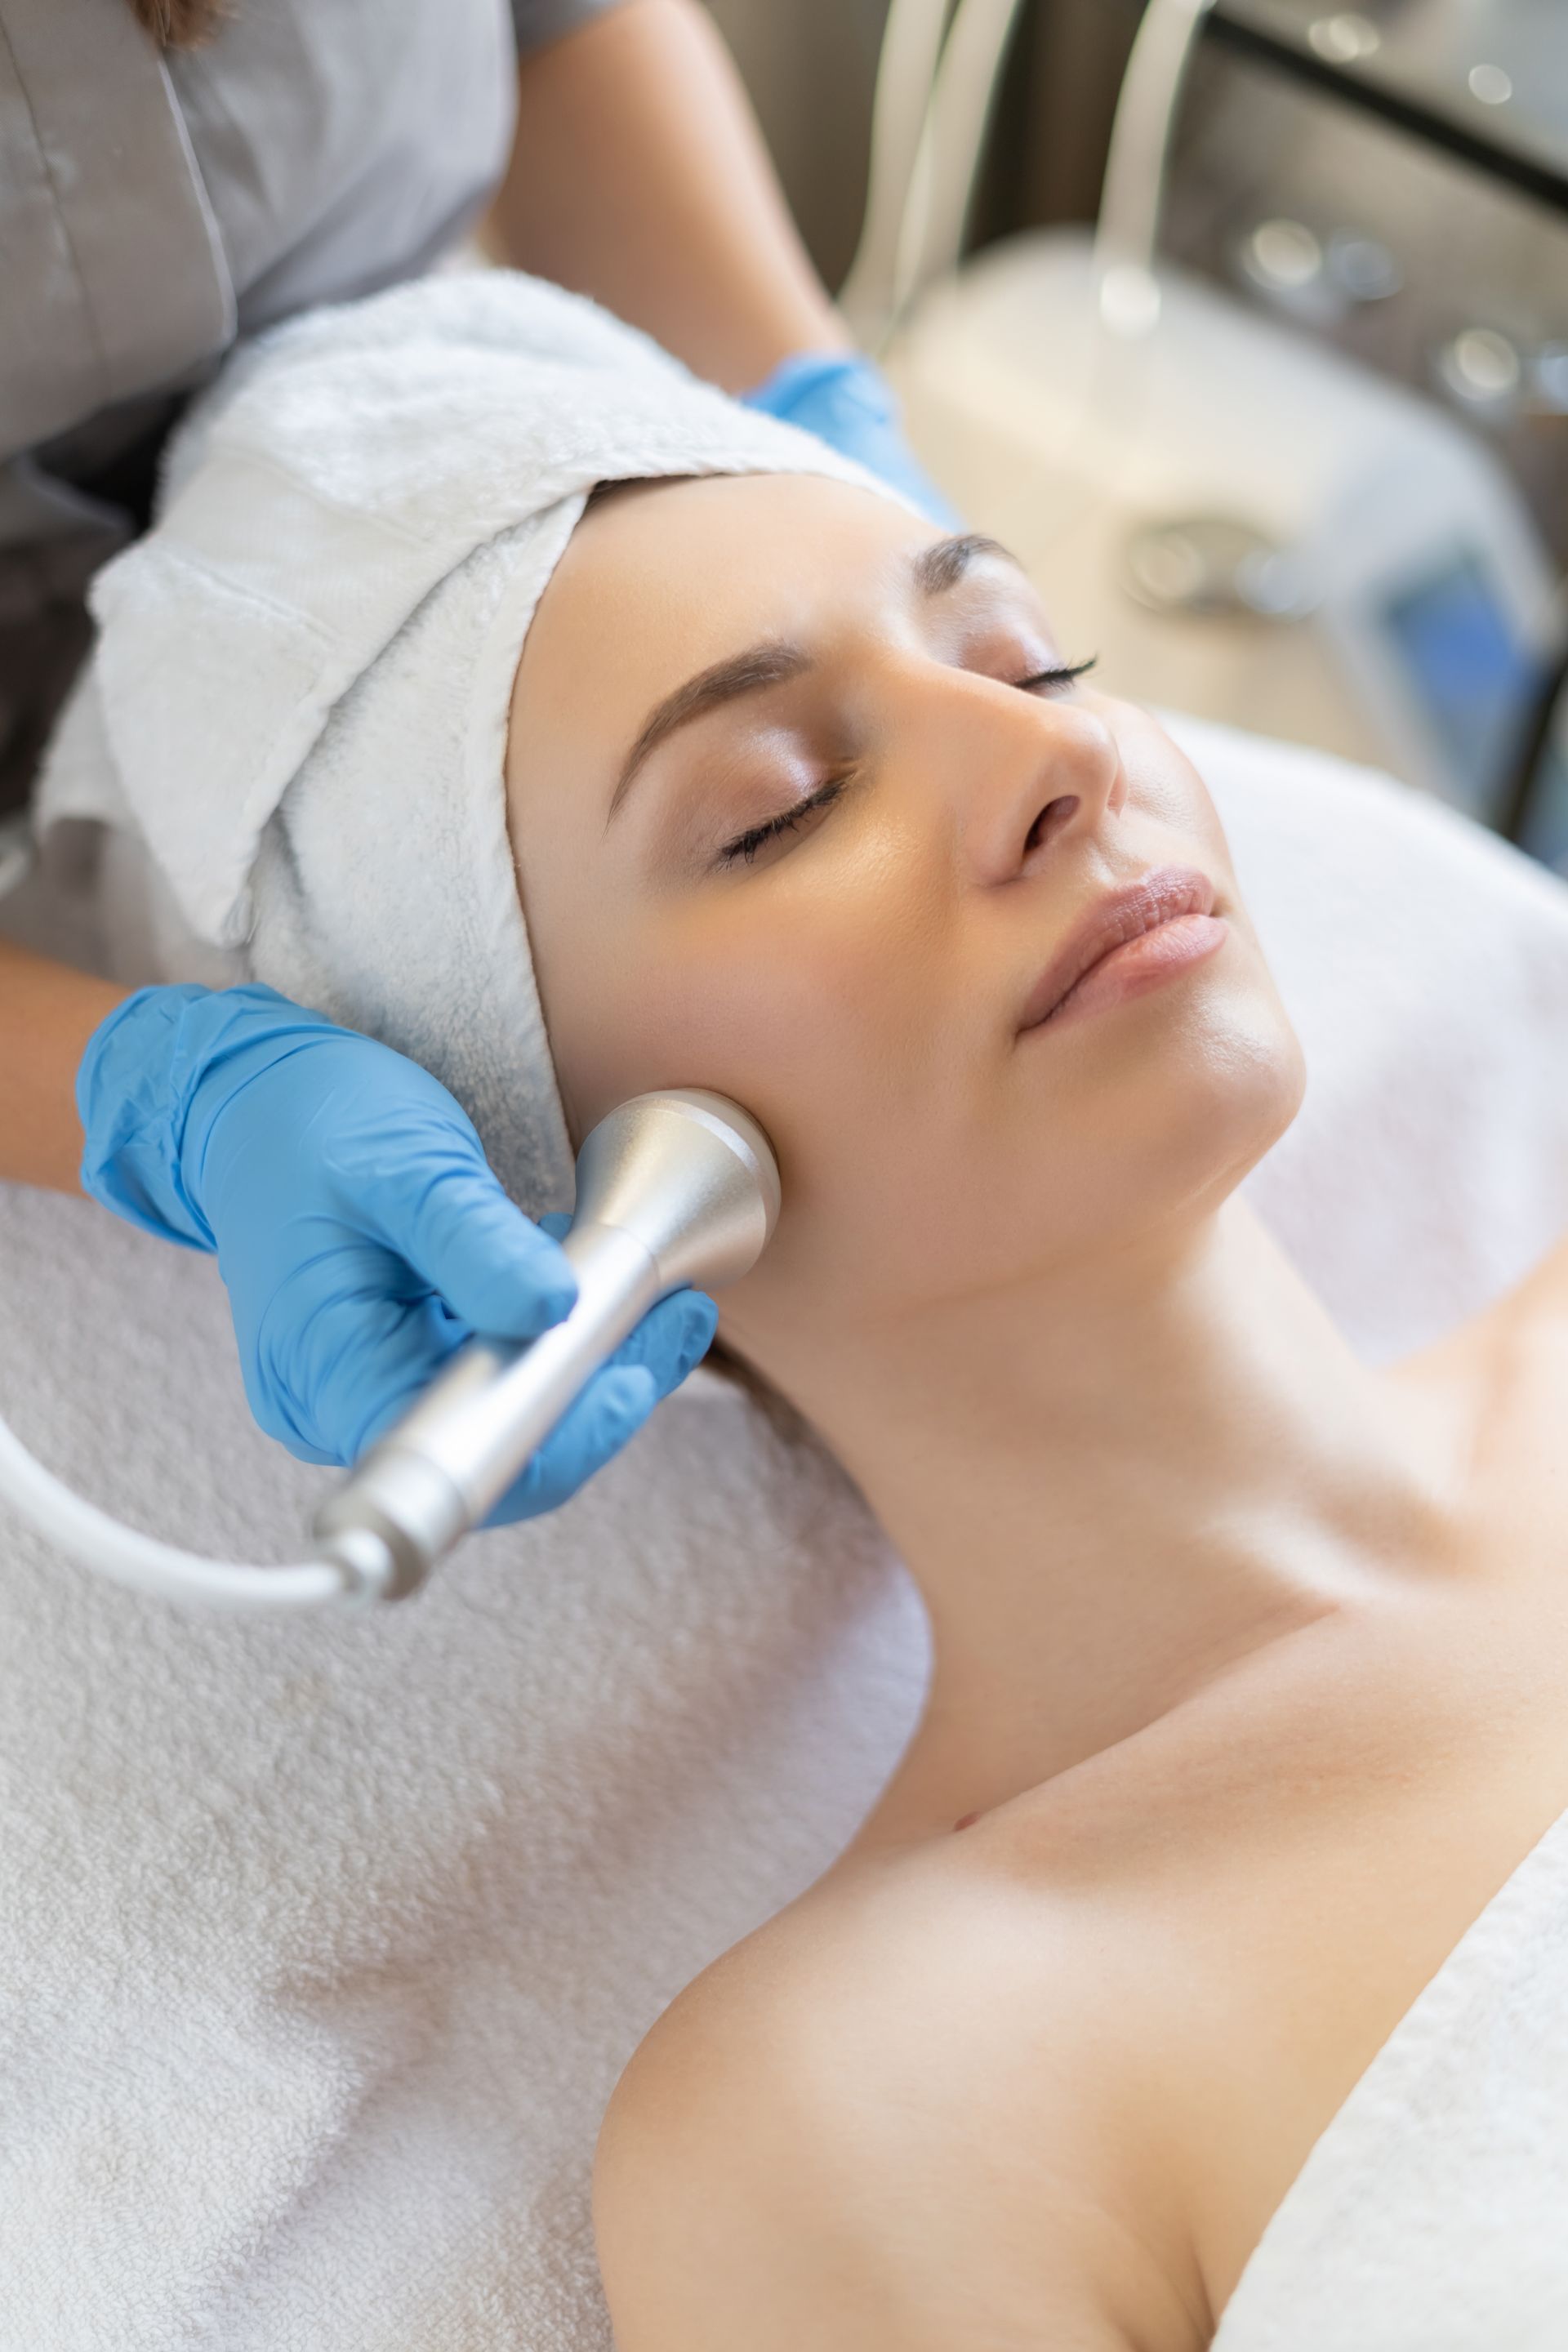 Woman getting a laser facial procedure done